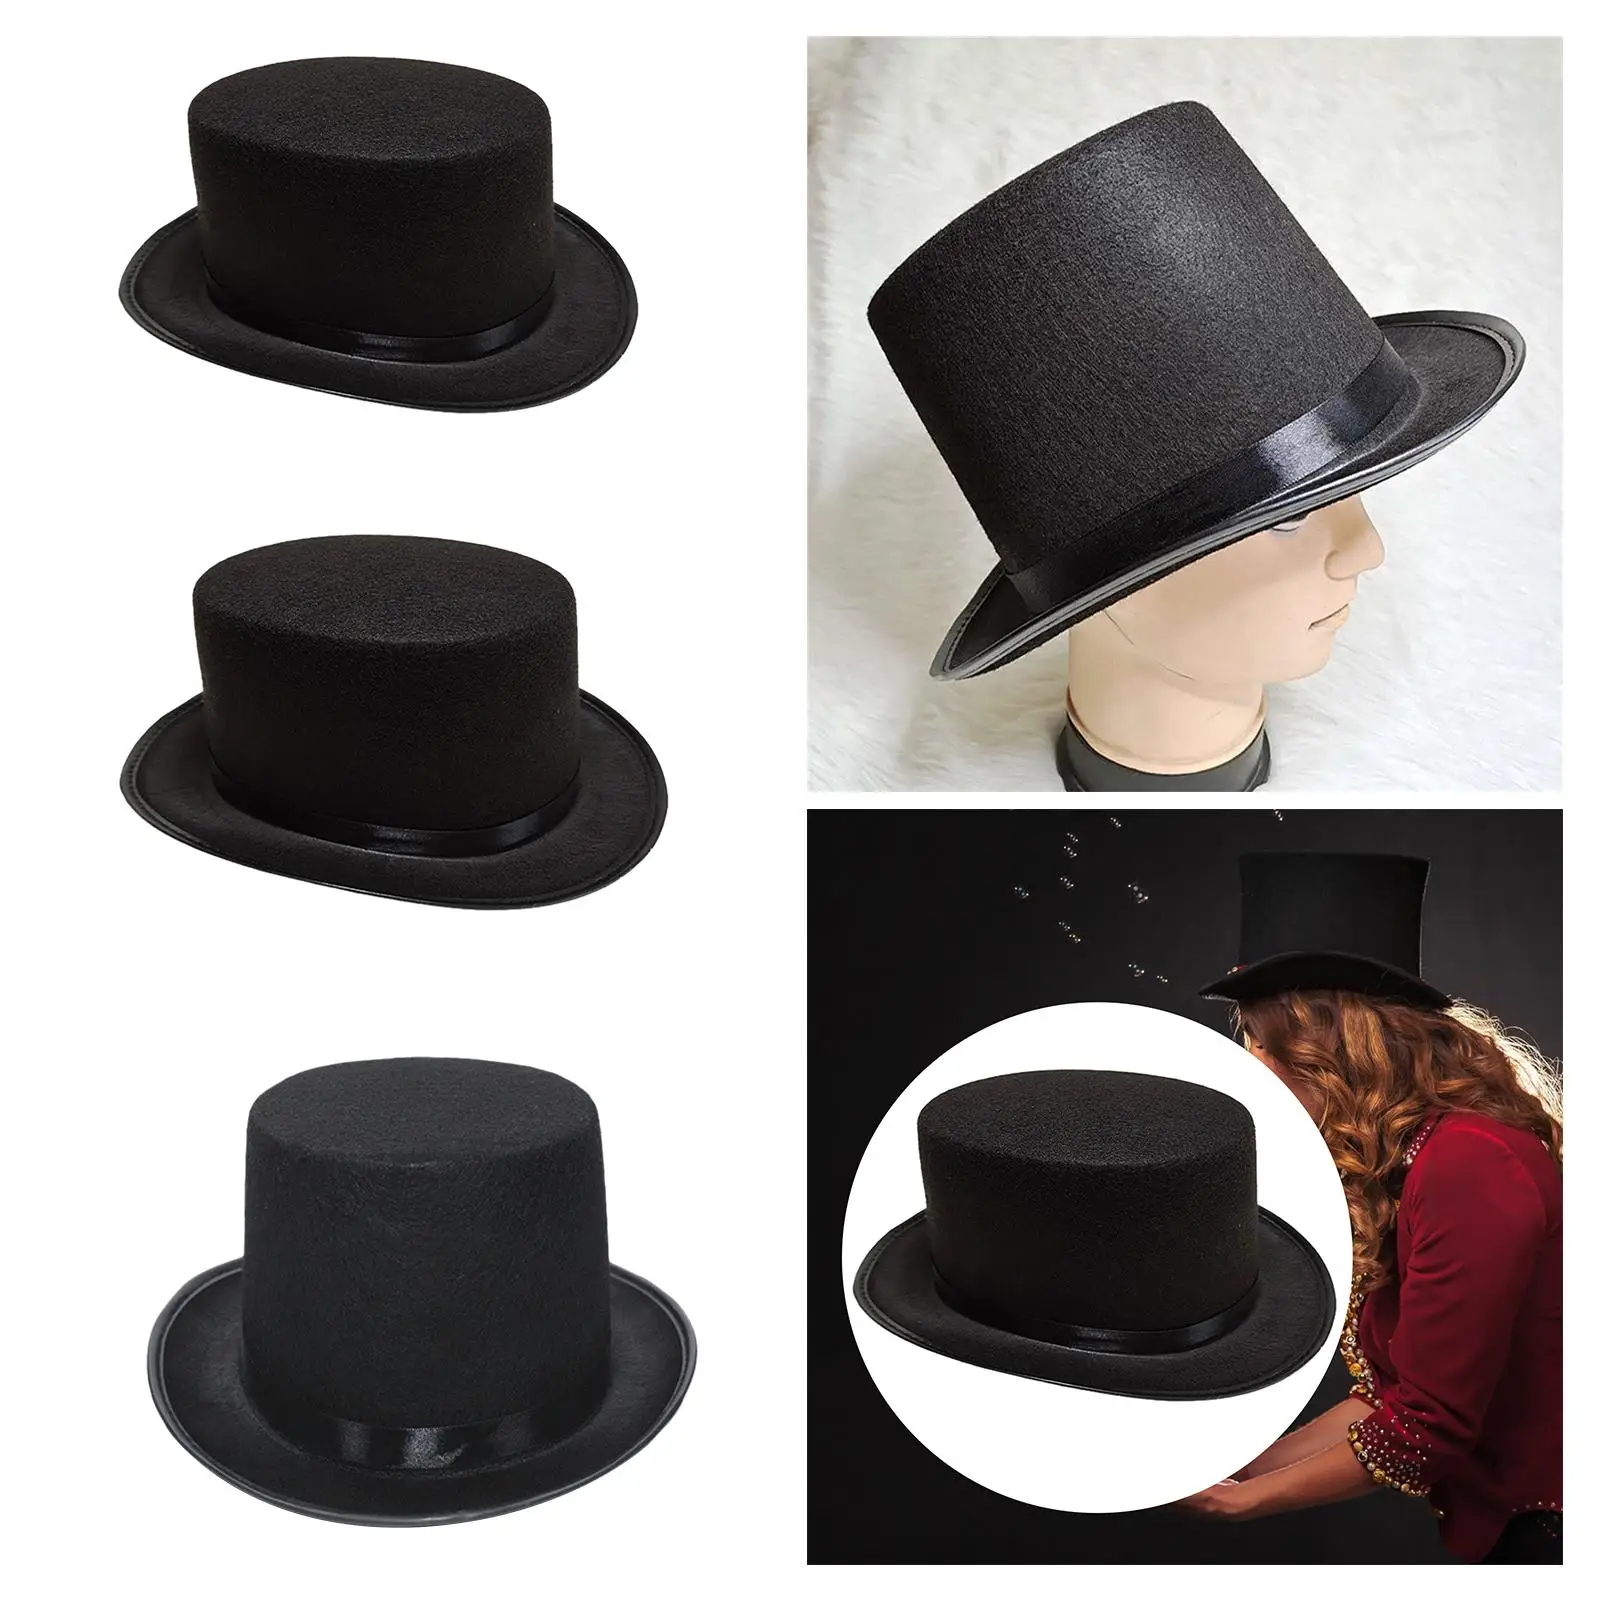 Felt Top Hat with Satin Band Dress up Fedora Hat Jazz Hat Magician Hat for Cosplay Masquerade Festival Themed Parties Carnival